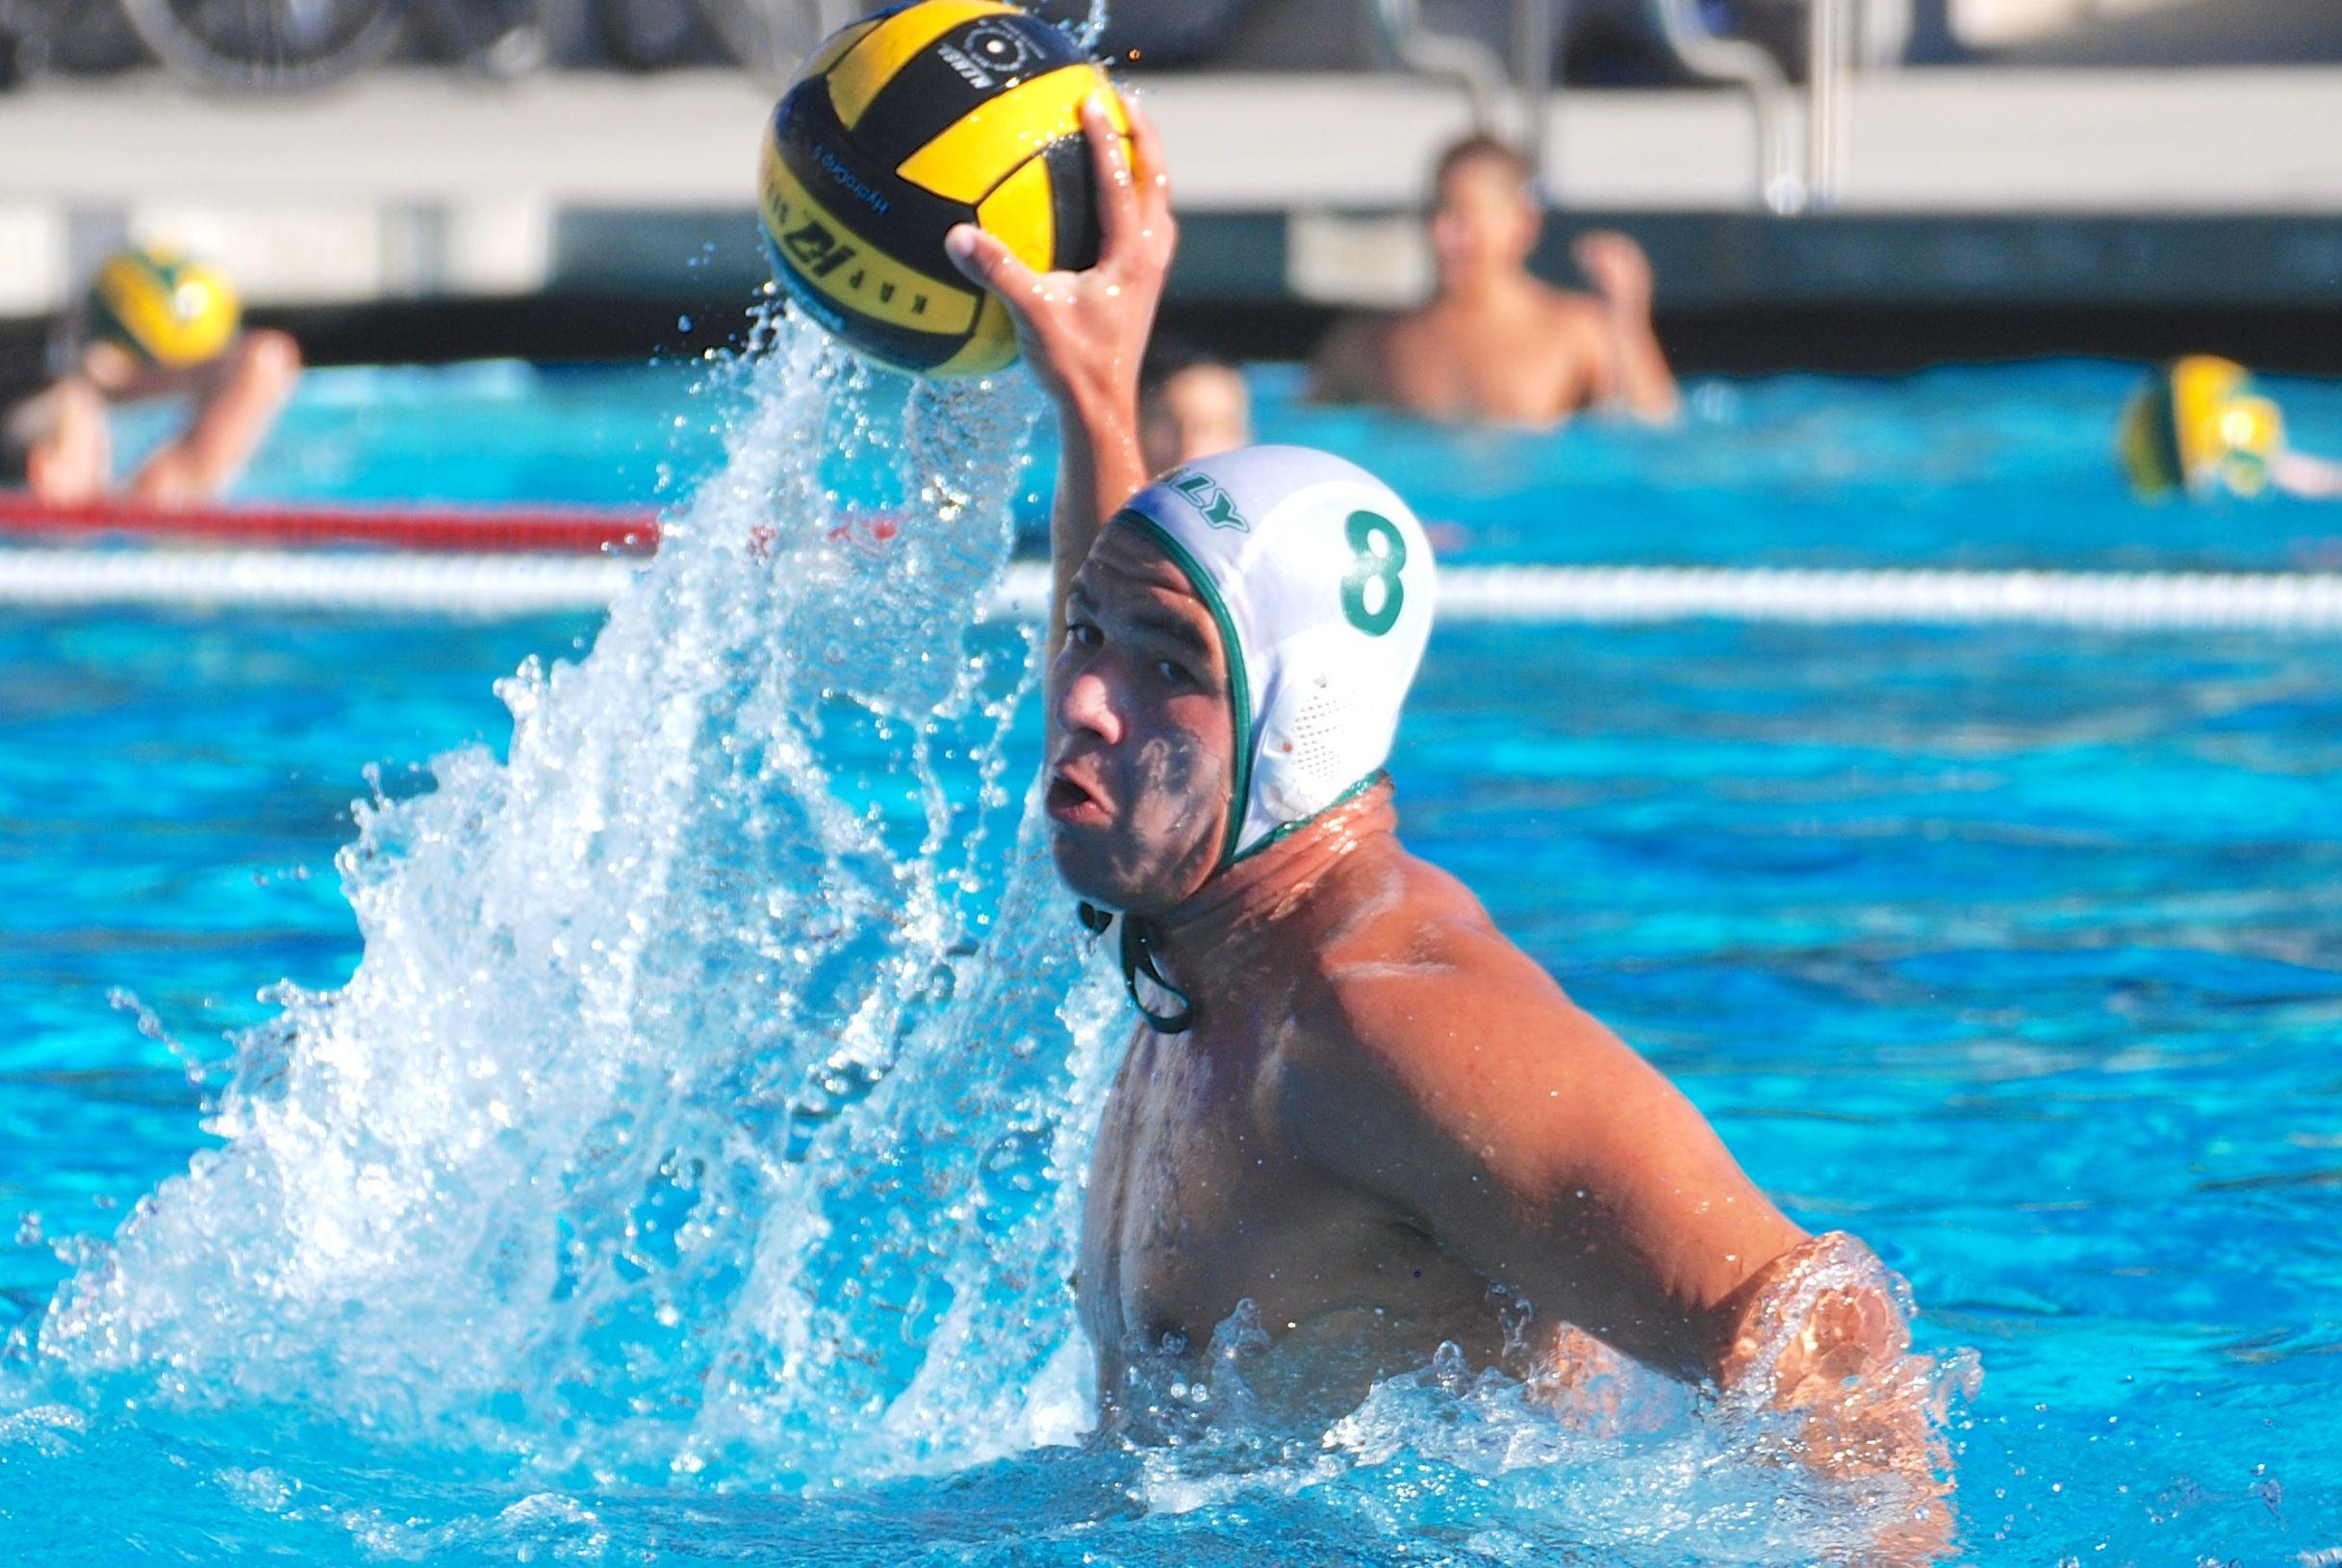 Varsity boys water polo player Kevin Bowers attempting to score a goal in a game against Henry M. Gunn High School